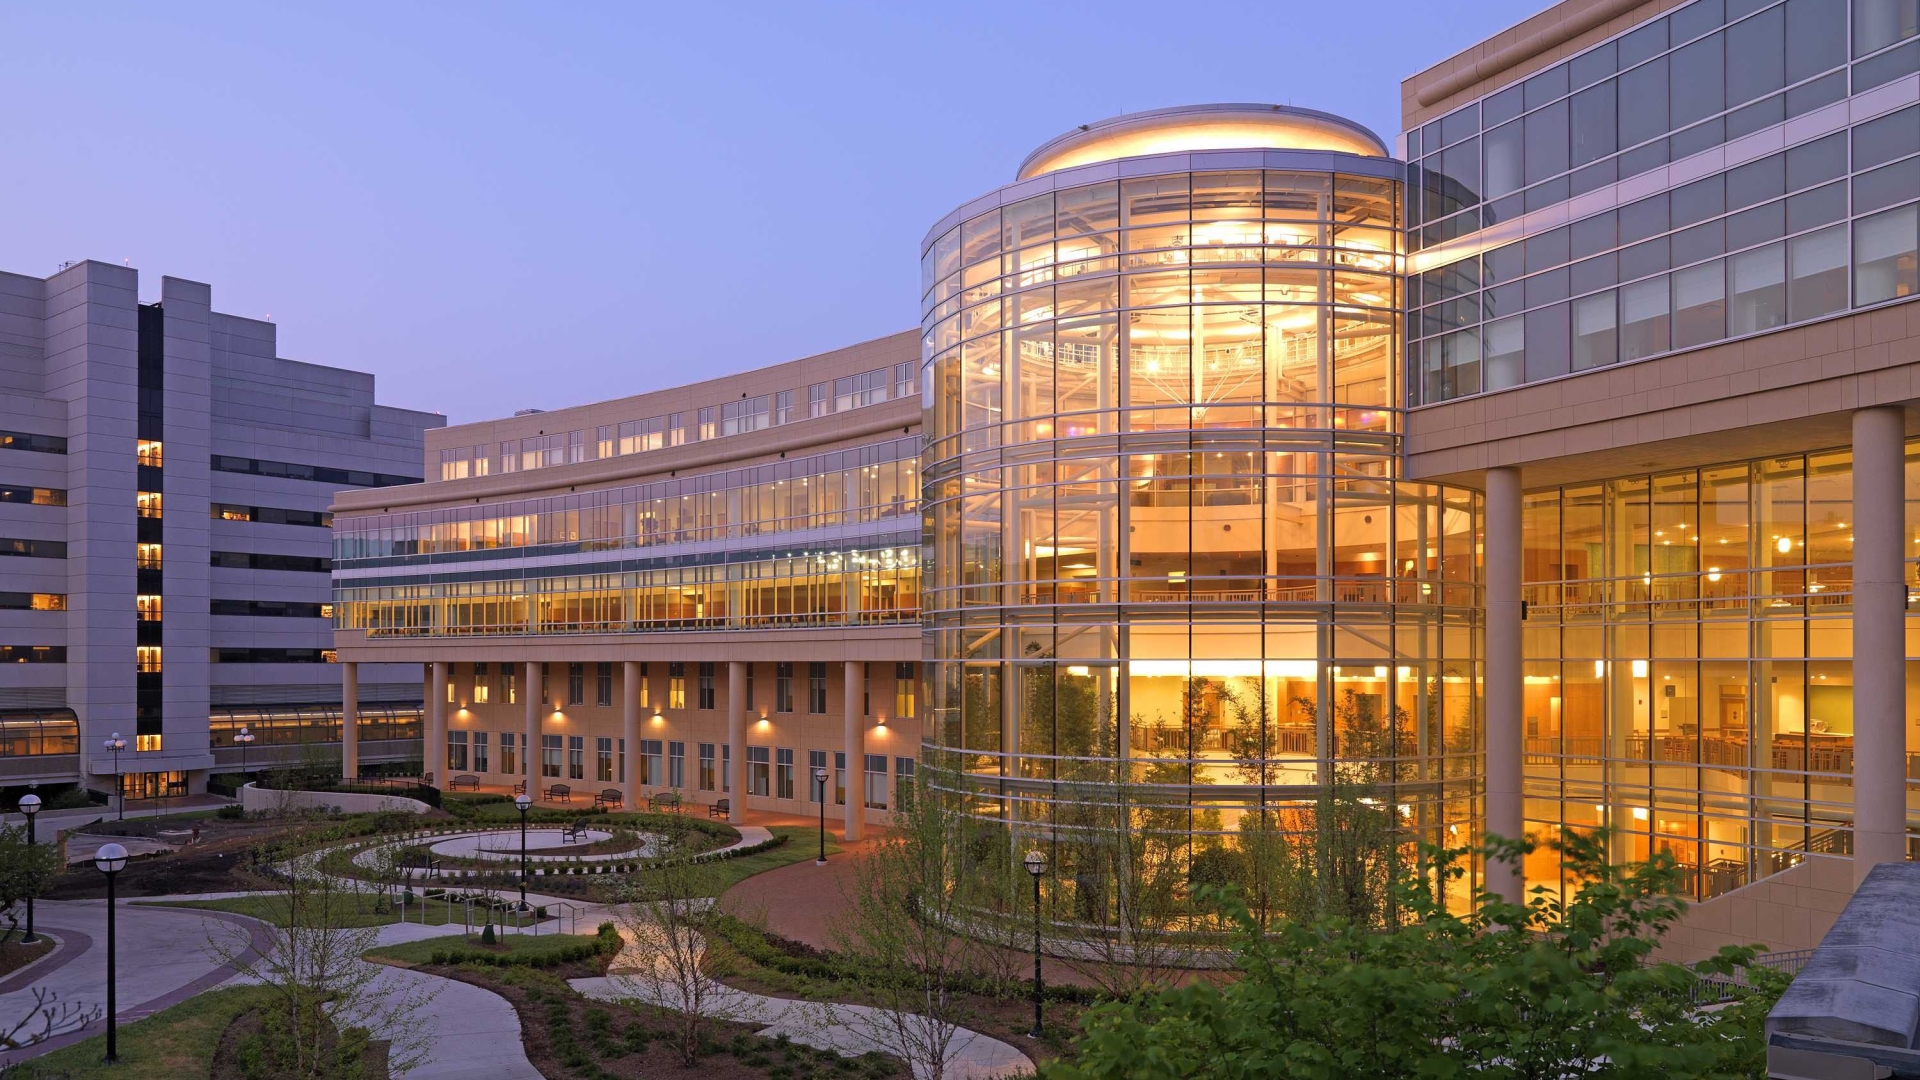 exterior view of cardiovascular center at dusk with views of spiral garden and interior atrium 